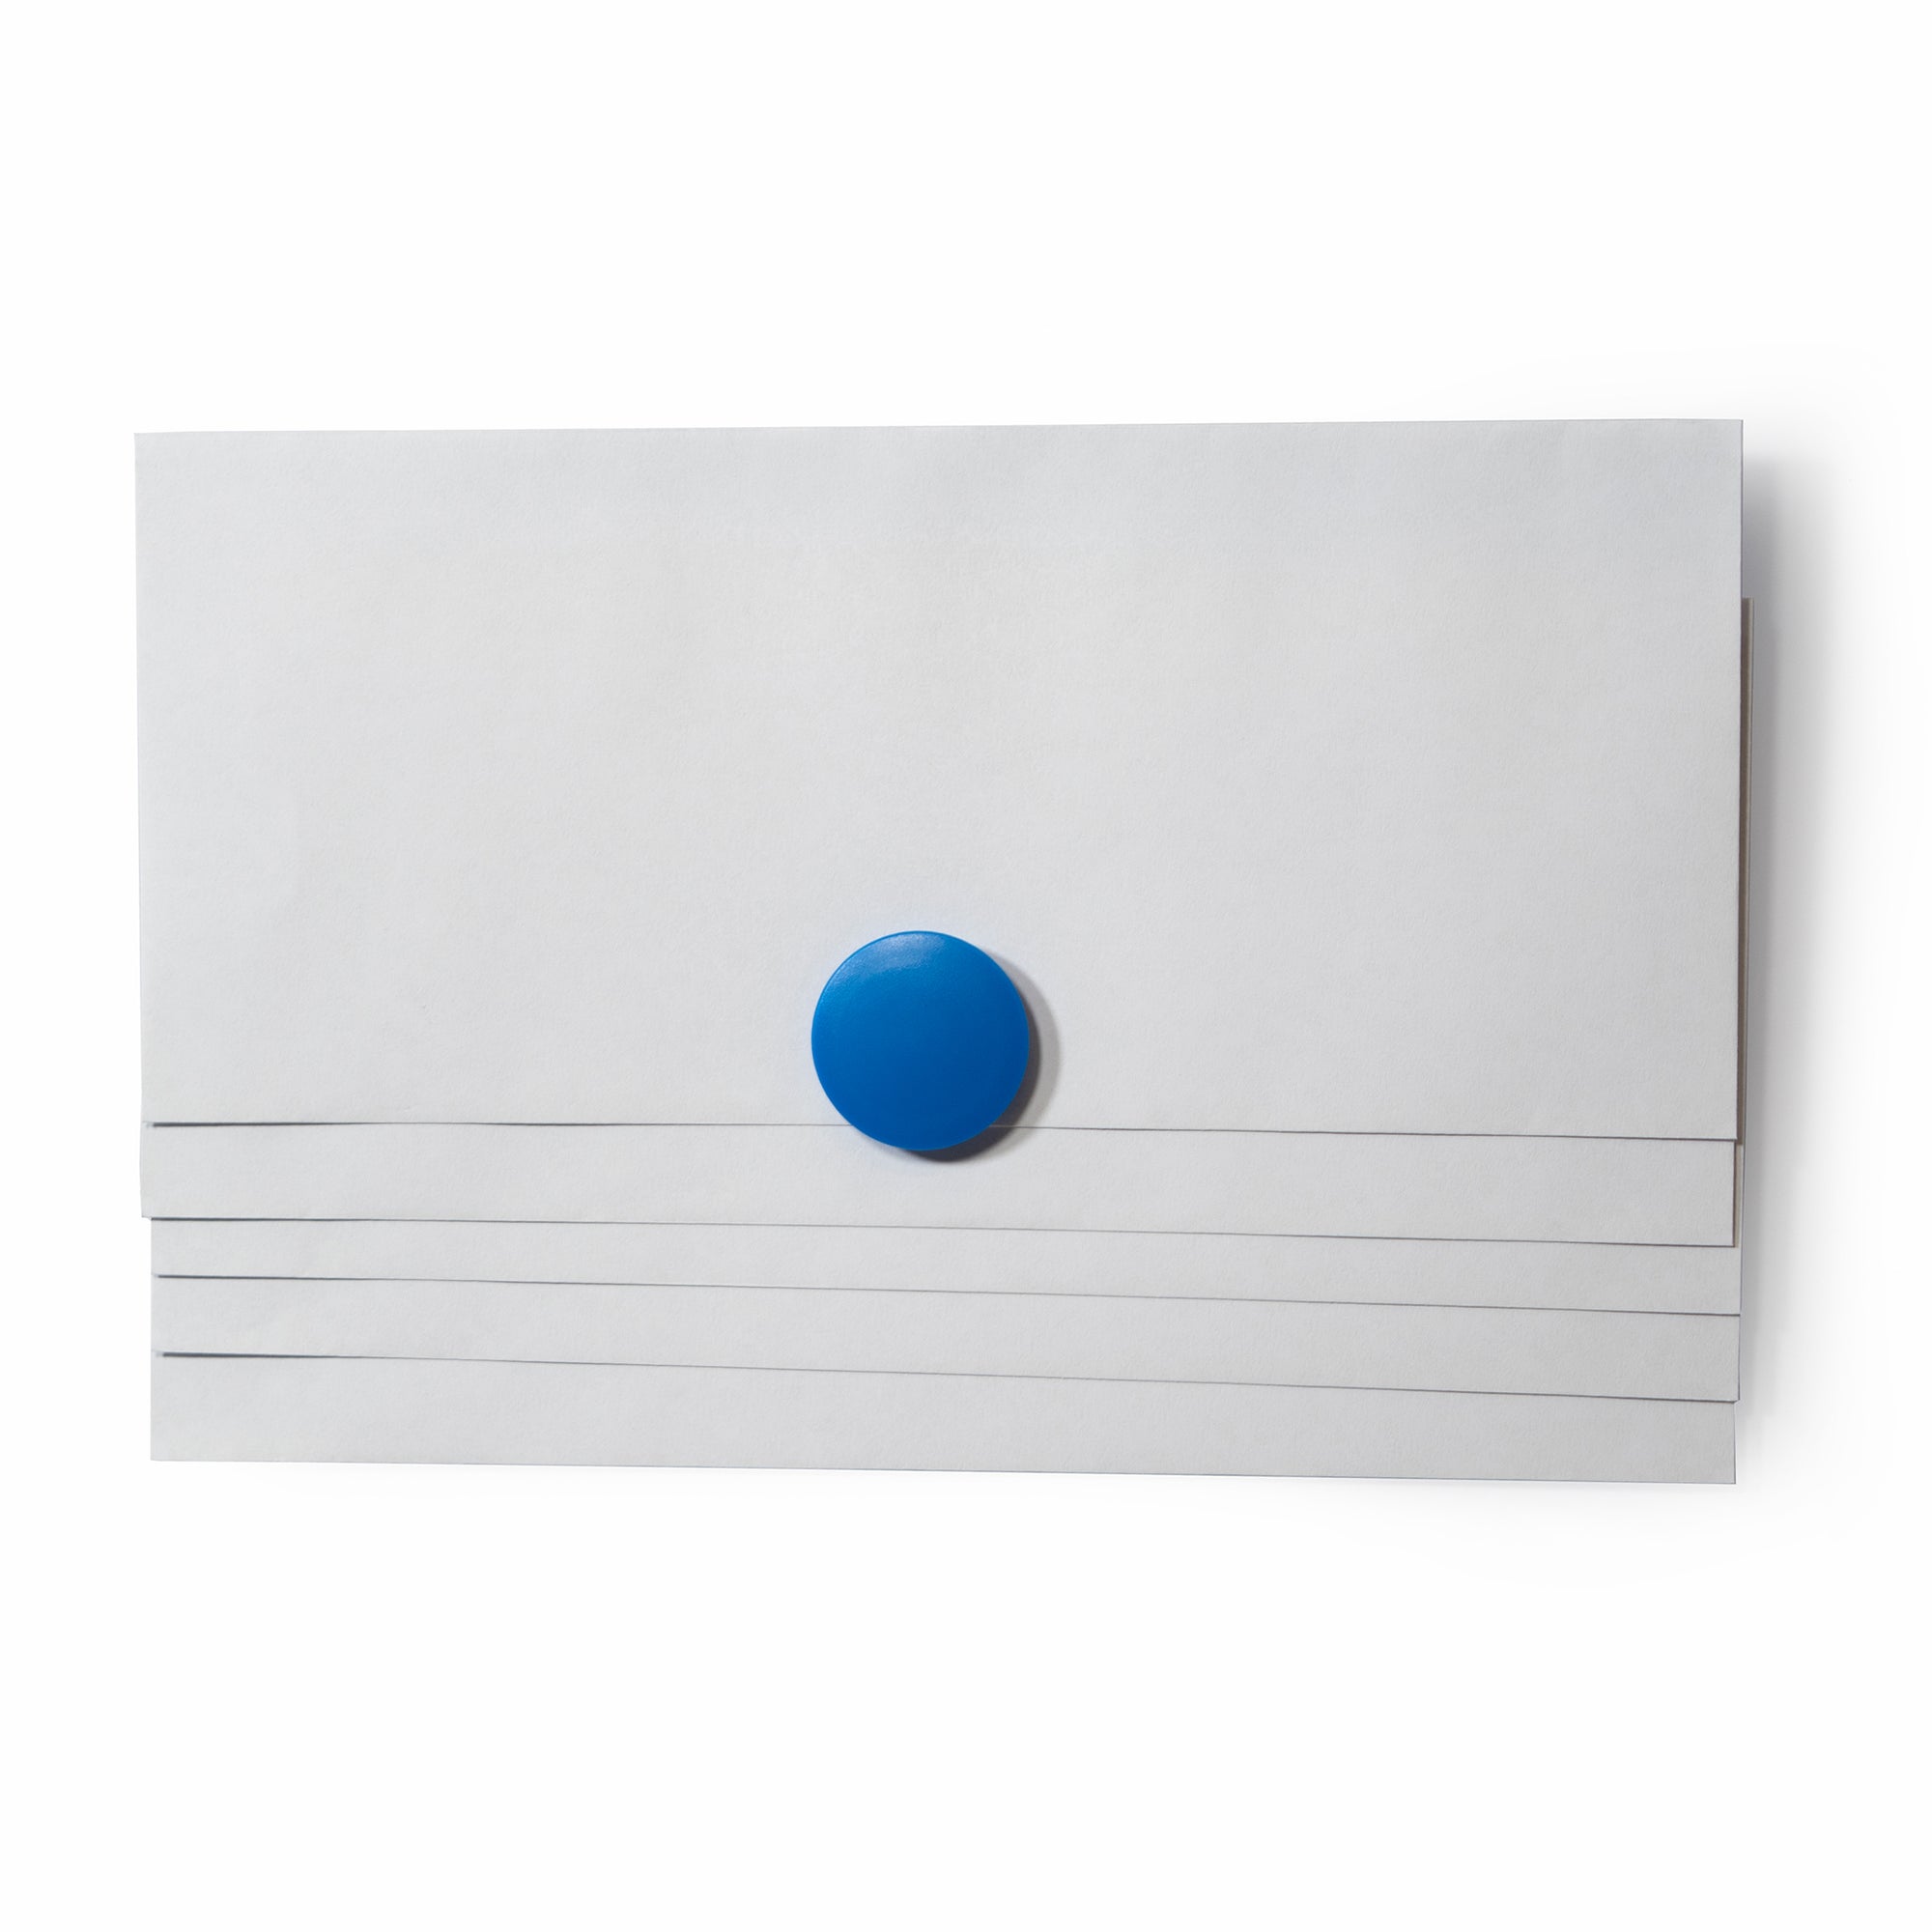 High Powered Magnets for Glass Dry-Erase Boards, Set of 5 Blue.  Holding envelopes on glass boards. 